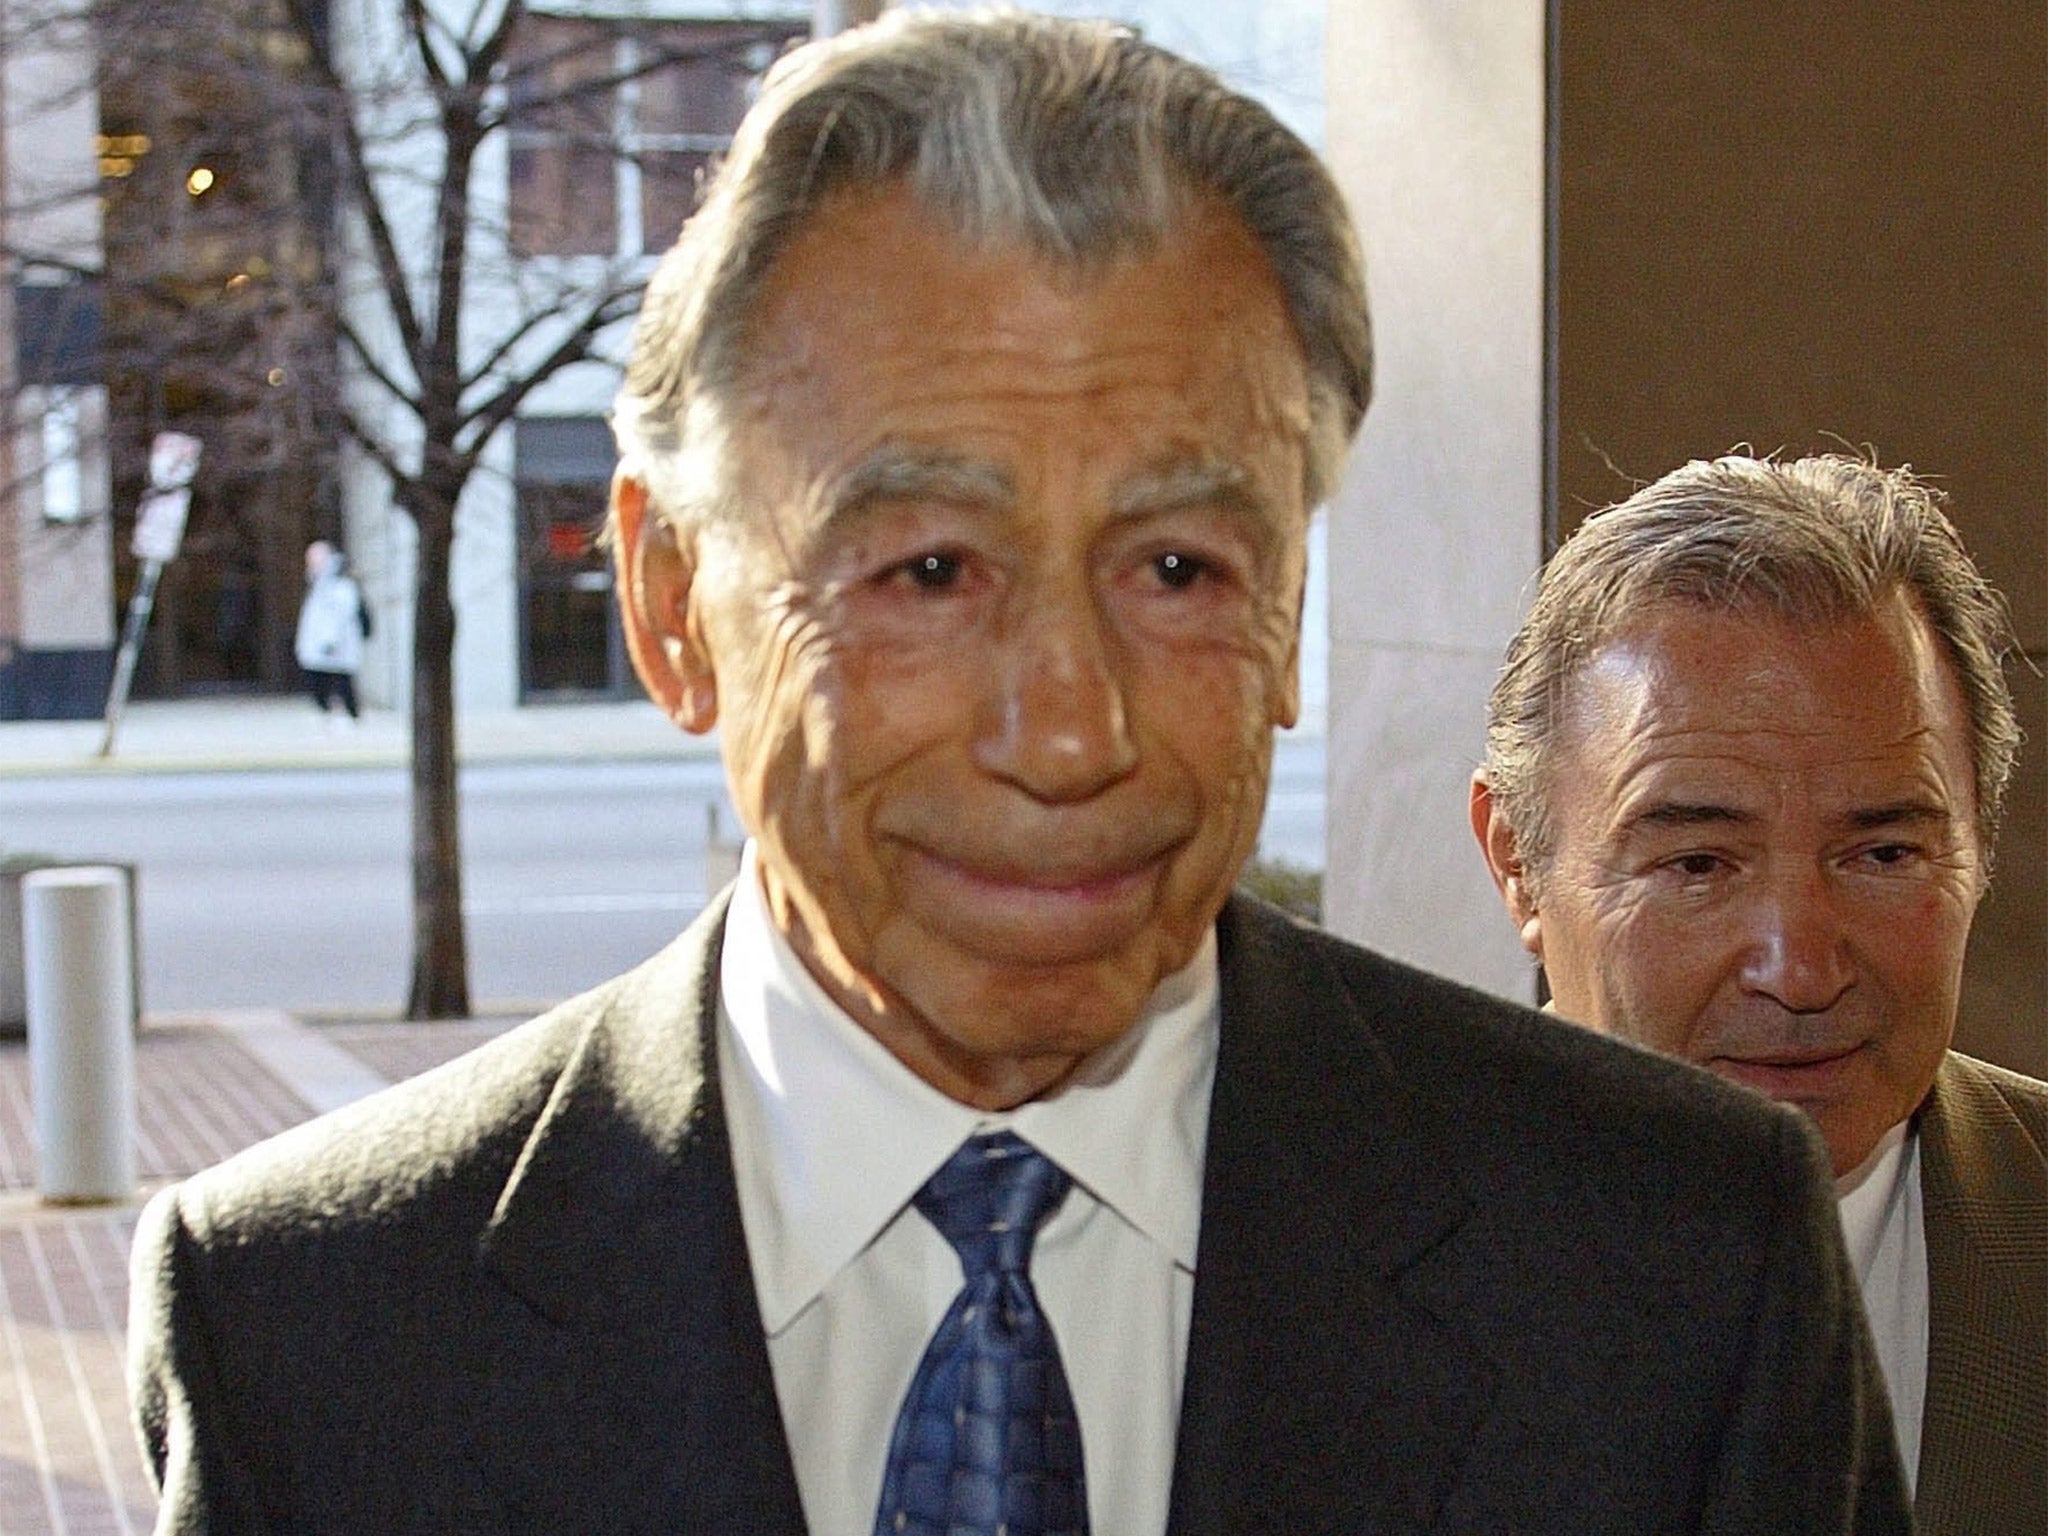 Kerkorian in 2003; the global financial crisis would see his fortune shrink from around $16bn to $4bn